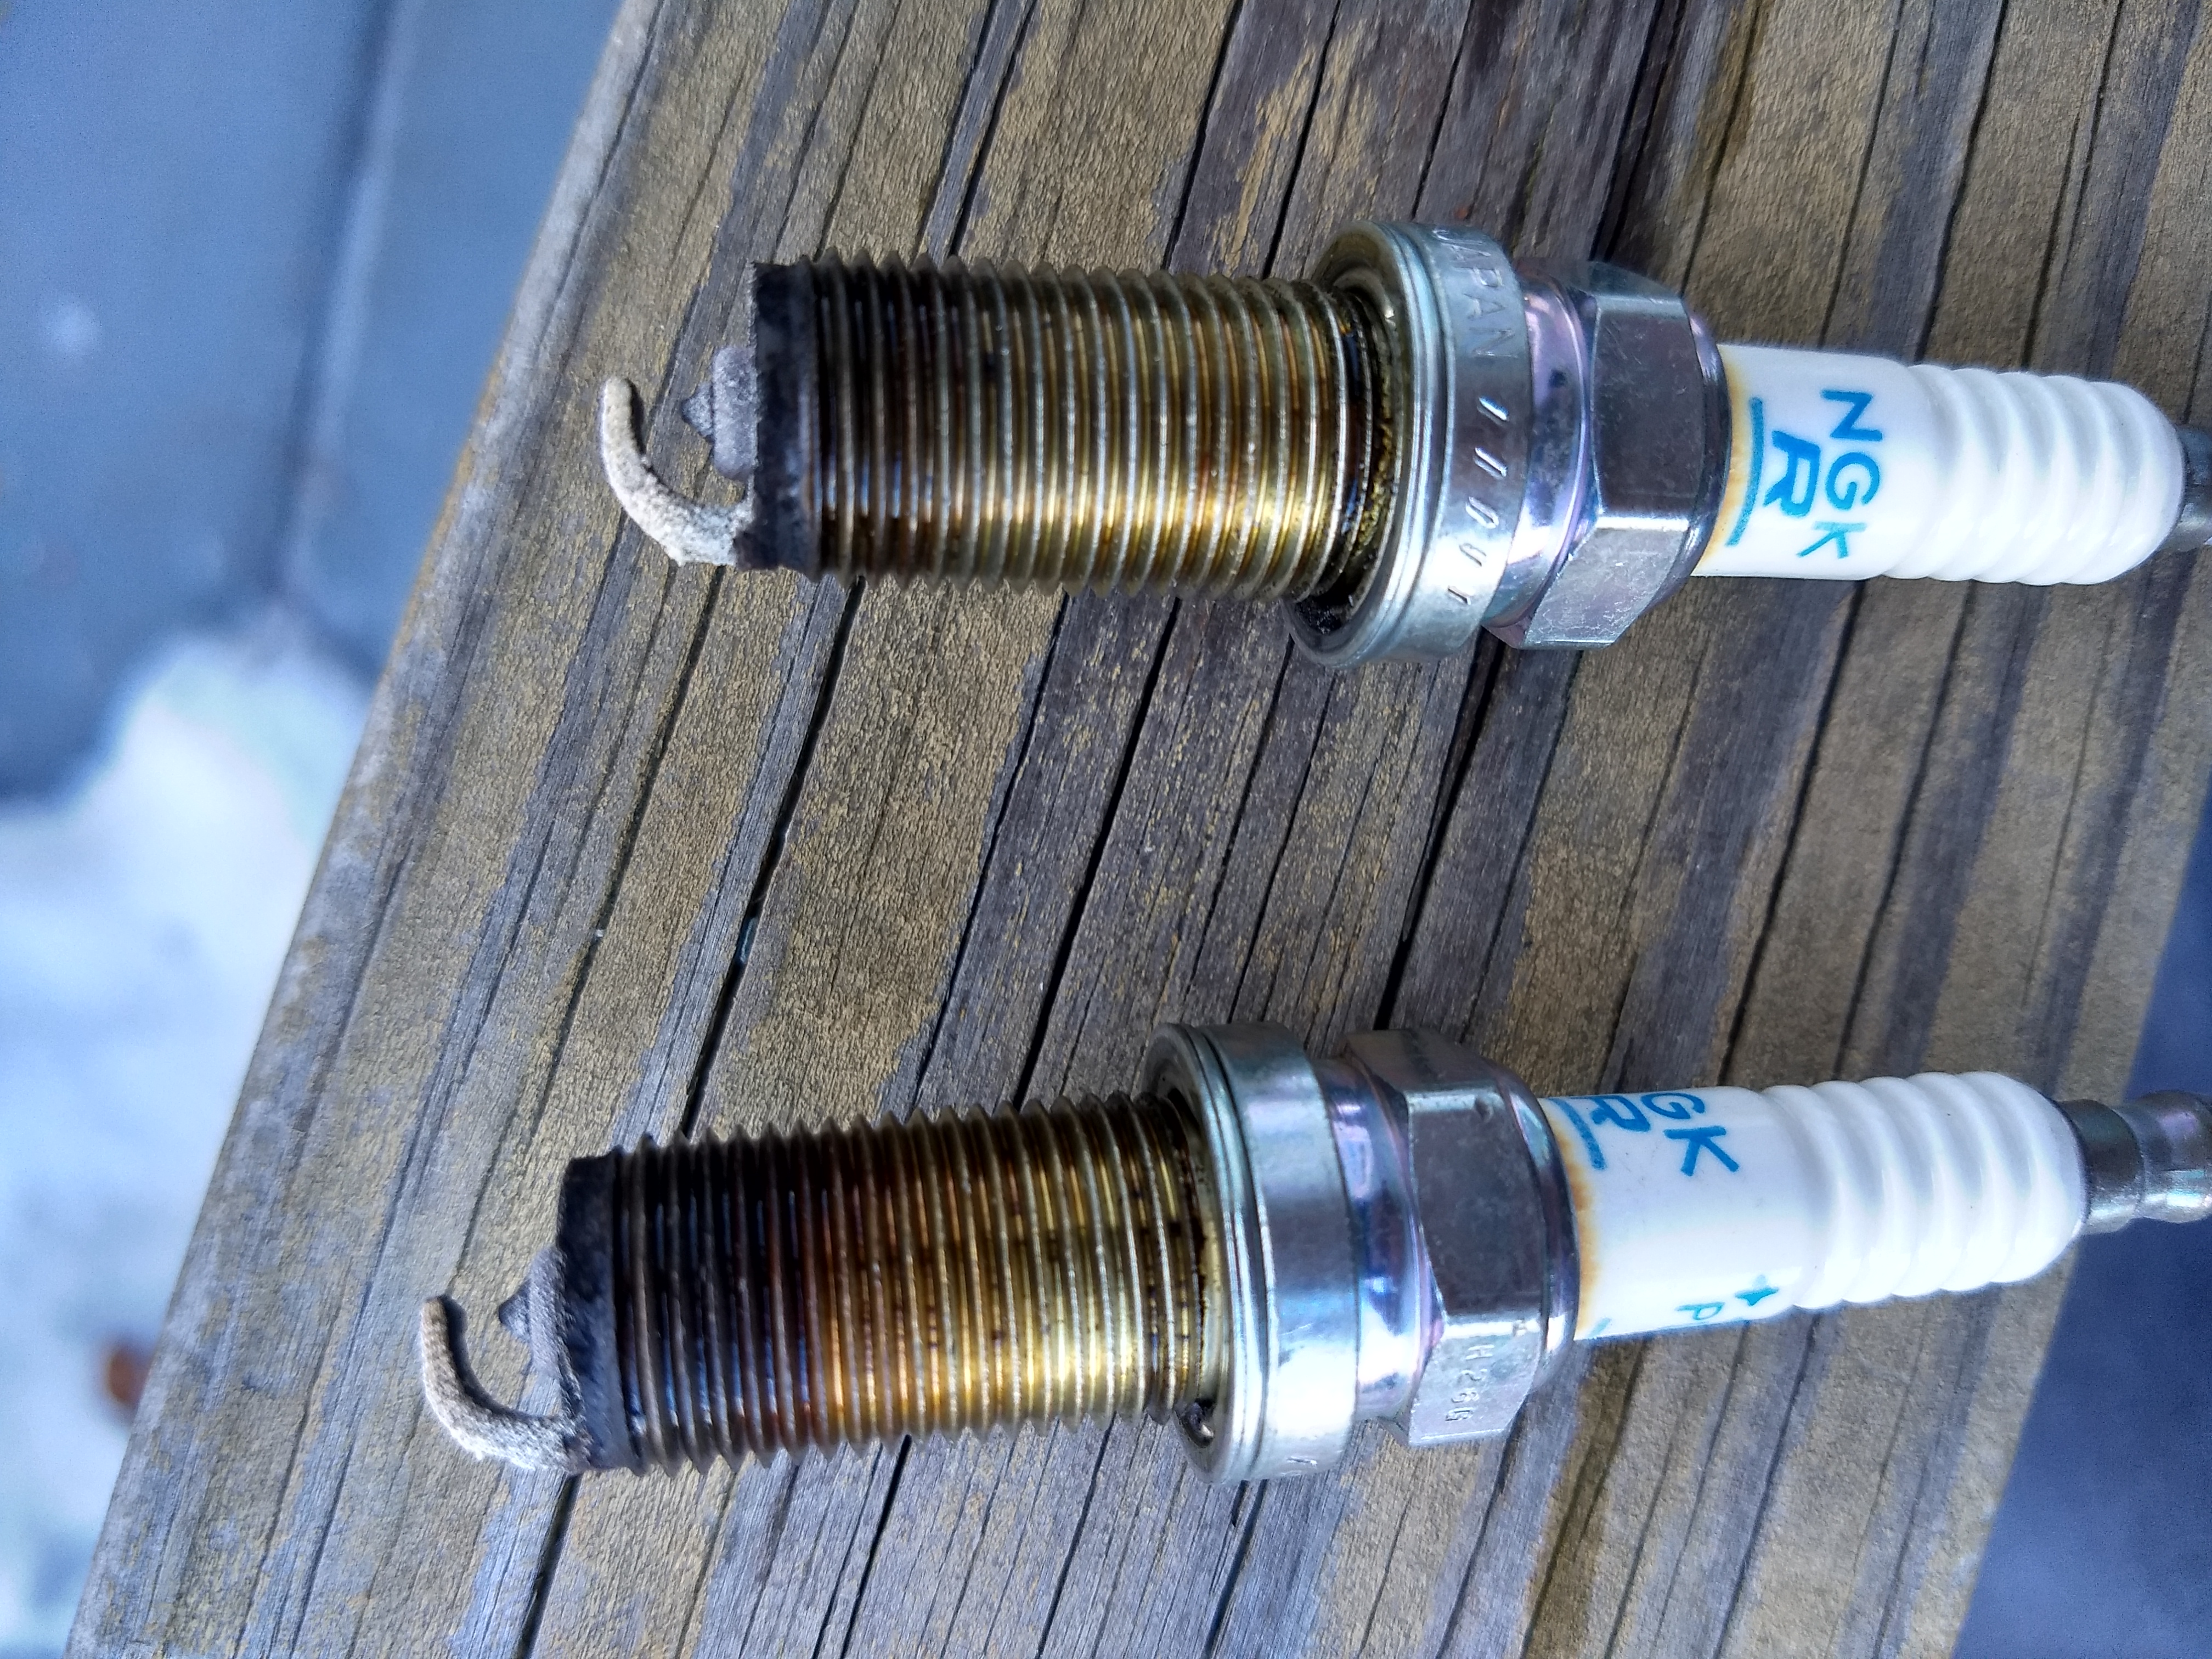 How do my spark plugs look? - Maxima Forums Why Does My Battery Spark When I Connect It